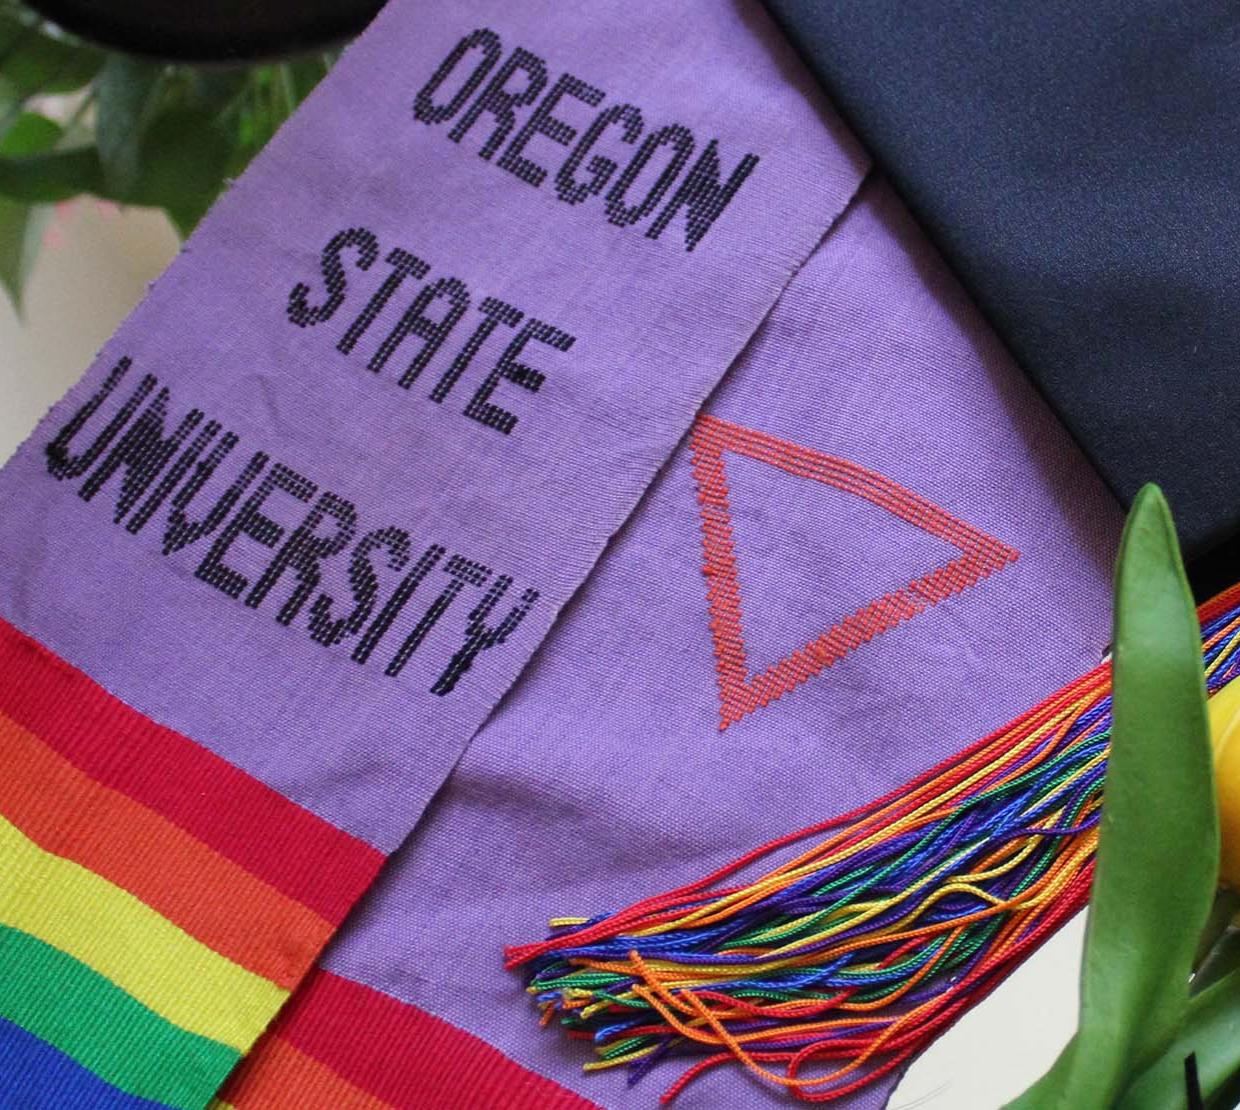 A graduation cap with a rainbow pride flag coming off the back